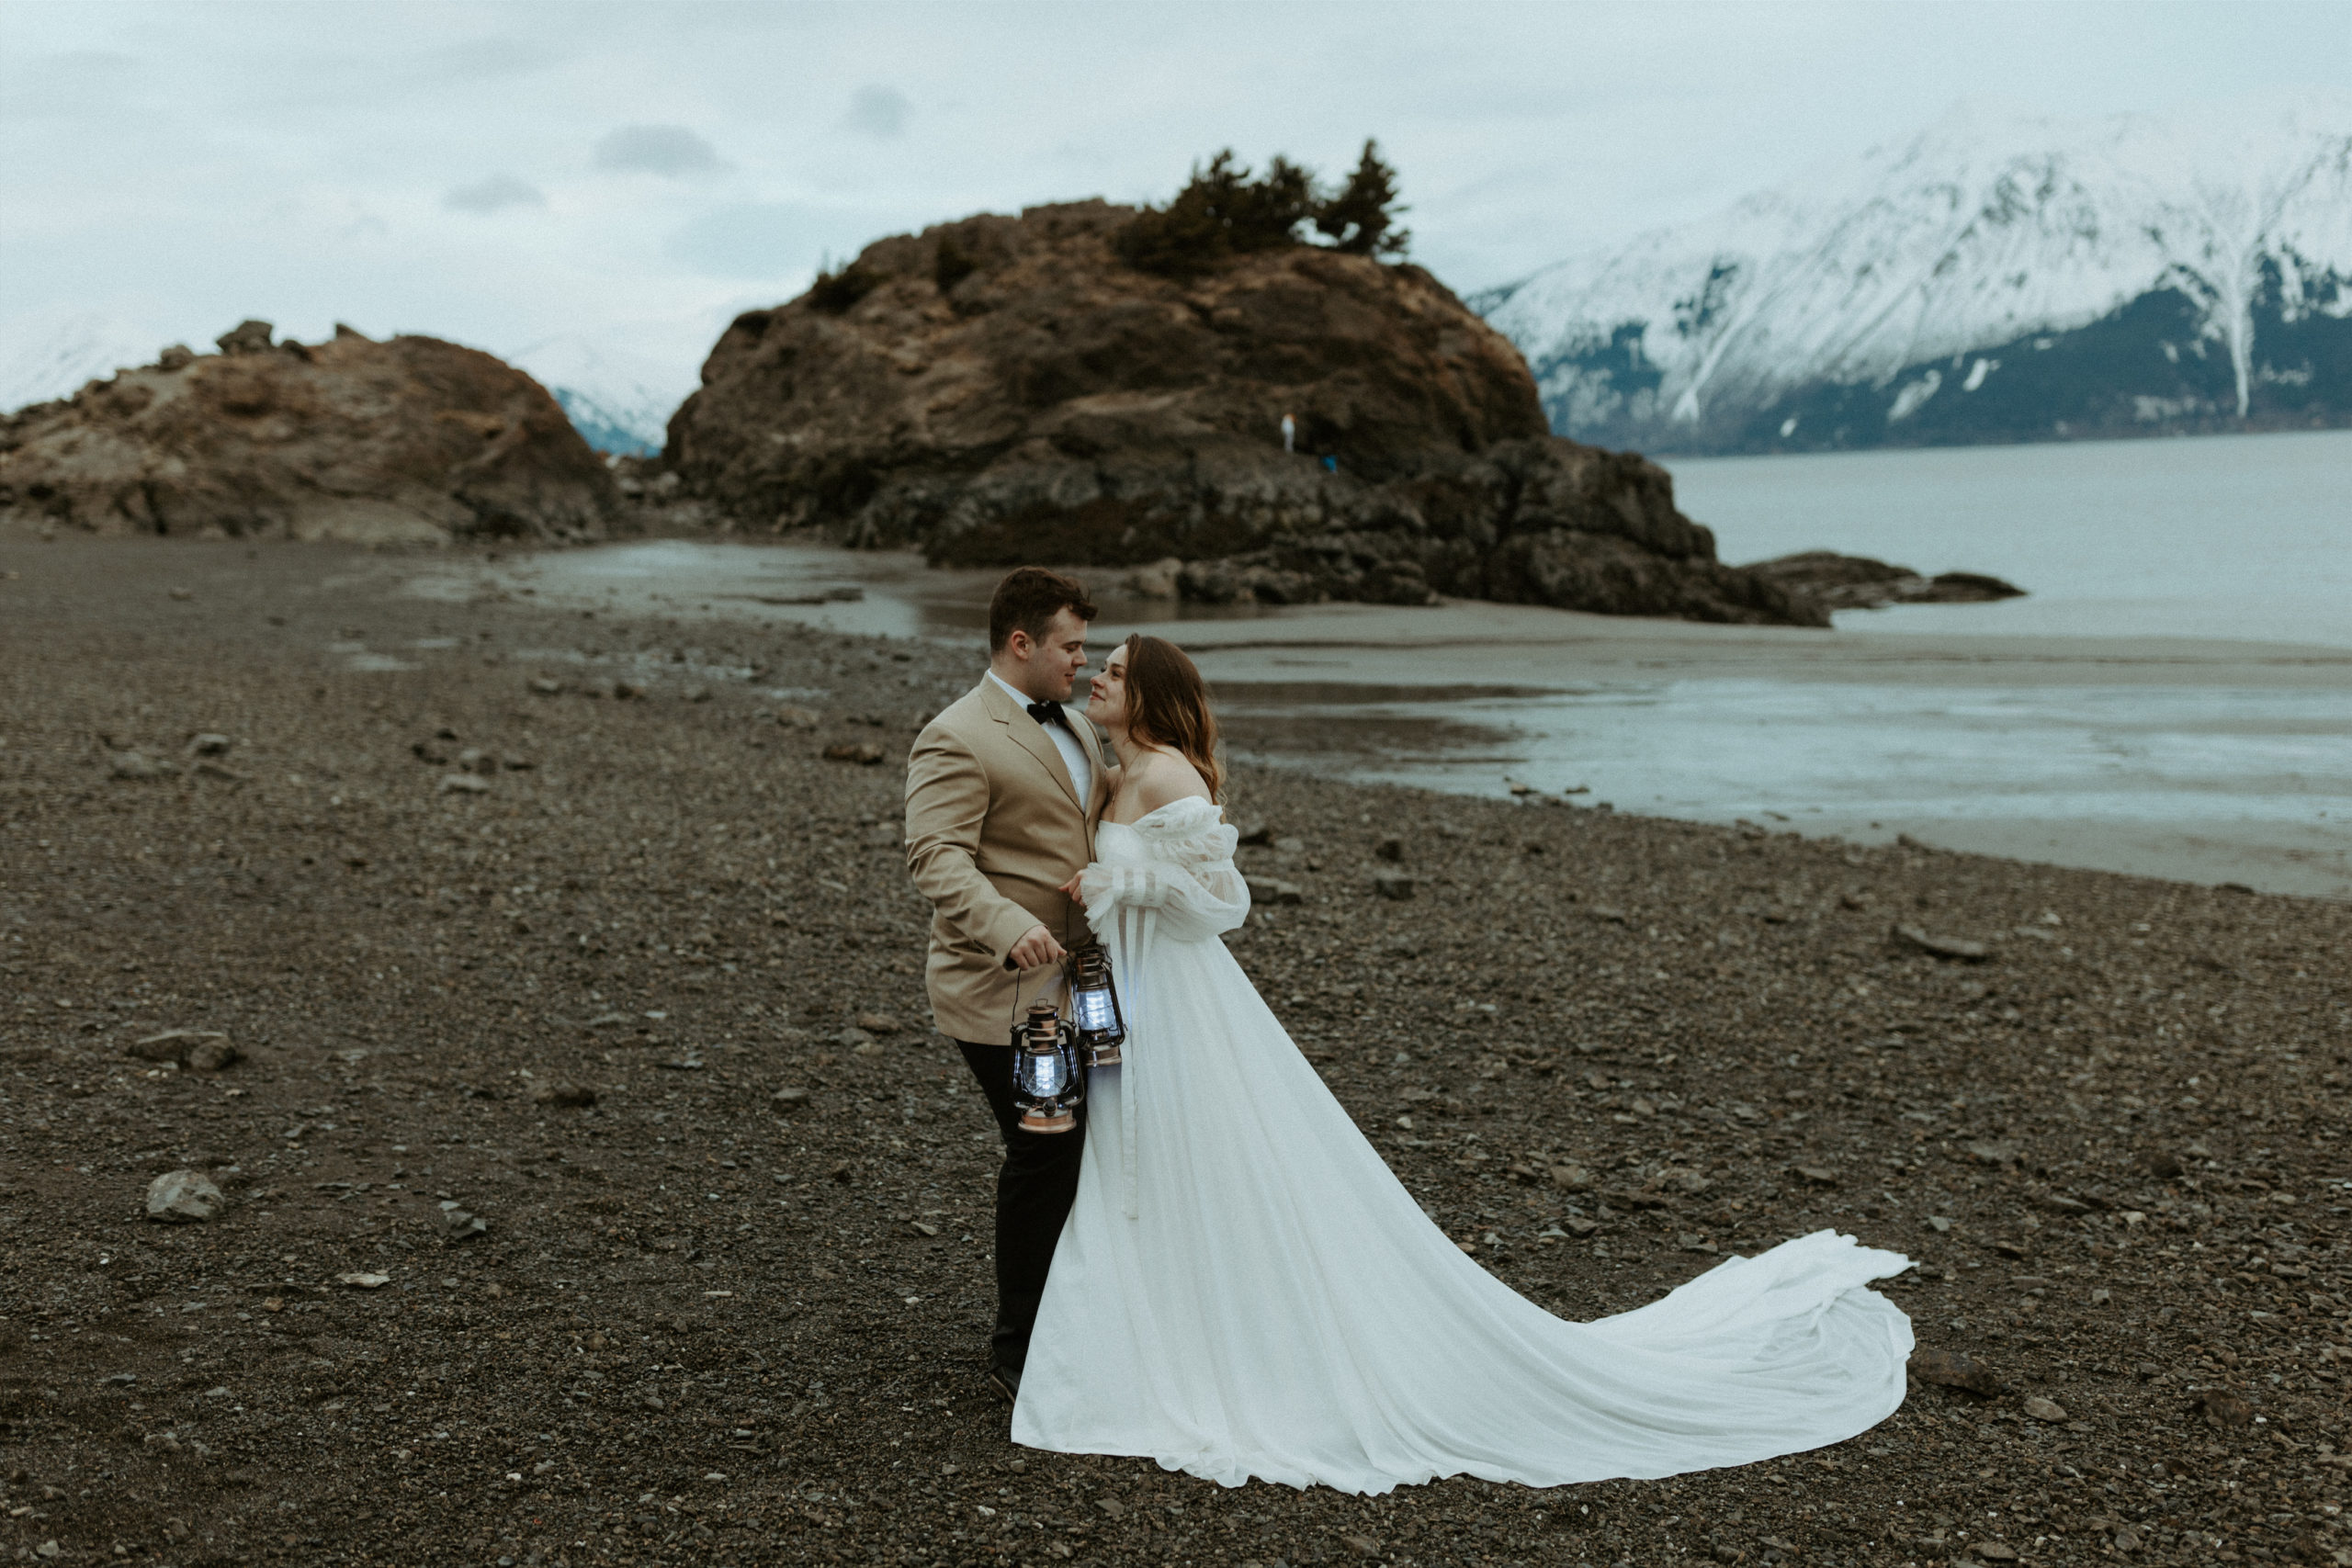 Beluga point the perfect place to elope in Alaska